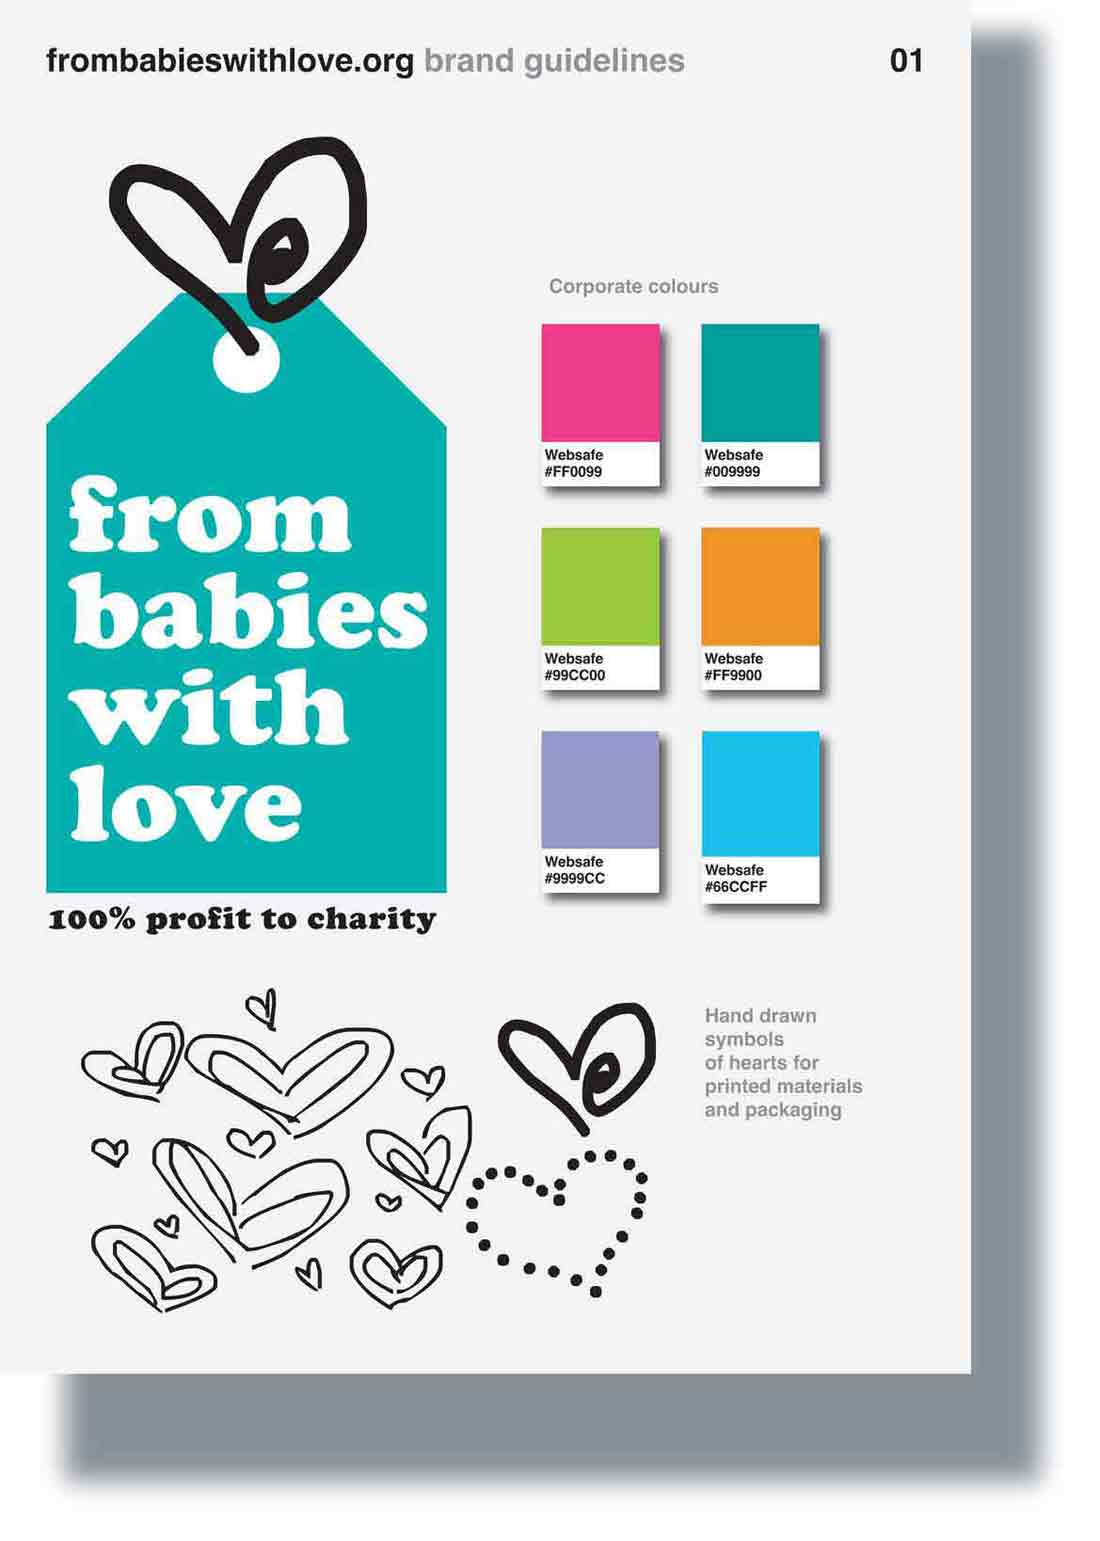 from babies with love logo and brand guideliness designed by ideology.uk.com